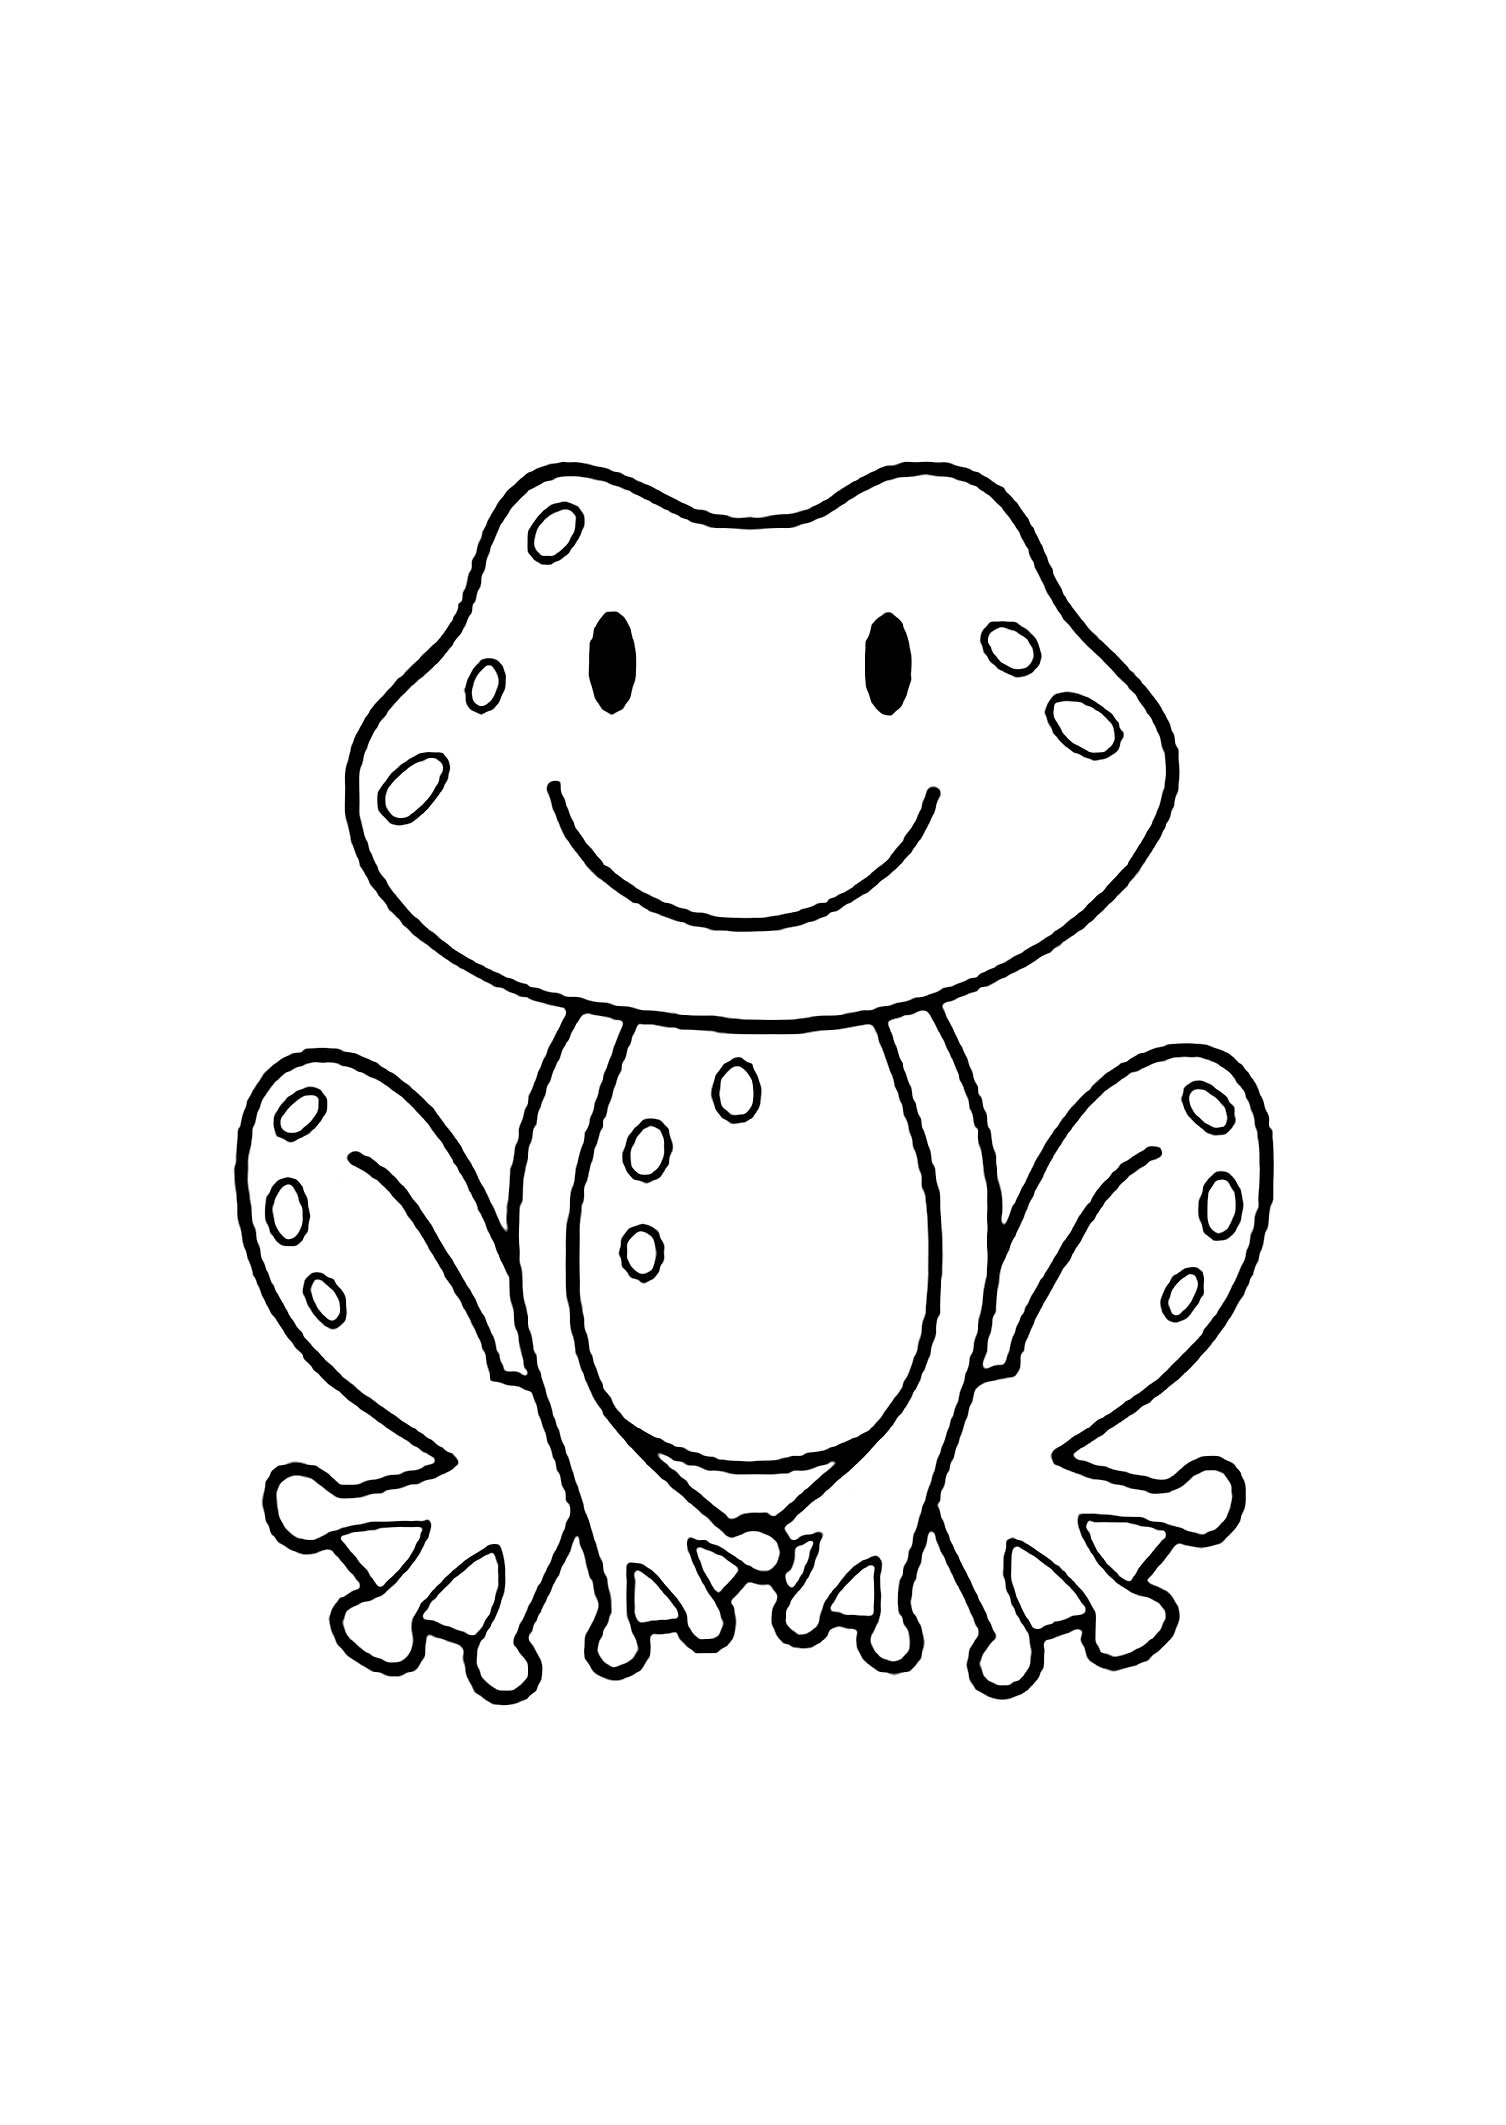 Frogs to color for children - Frogs Kids Coloring Pages